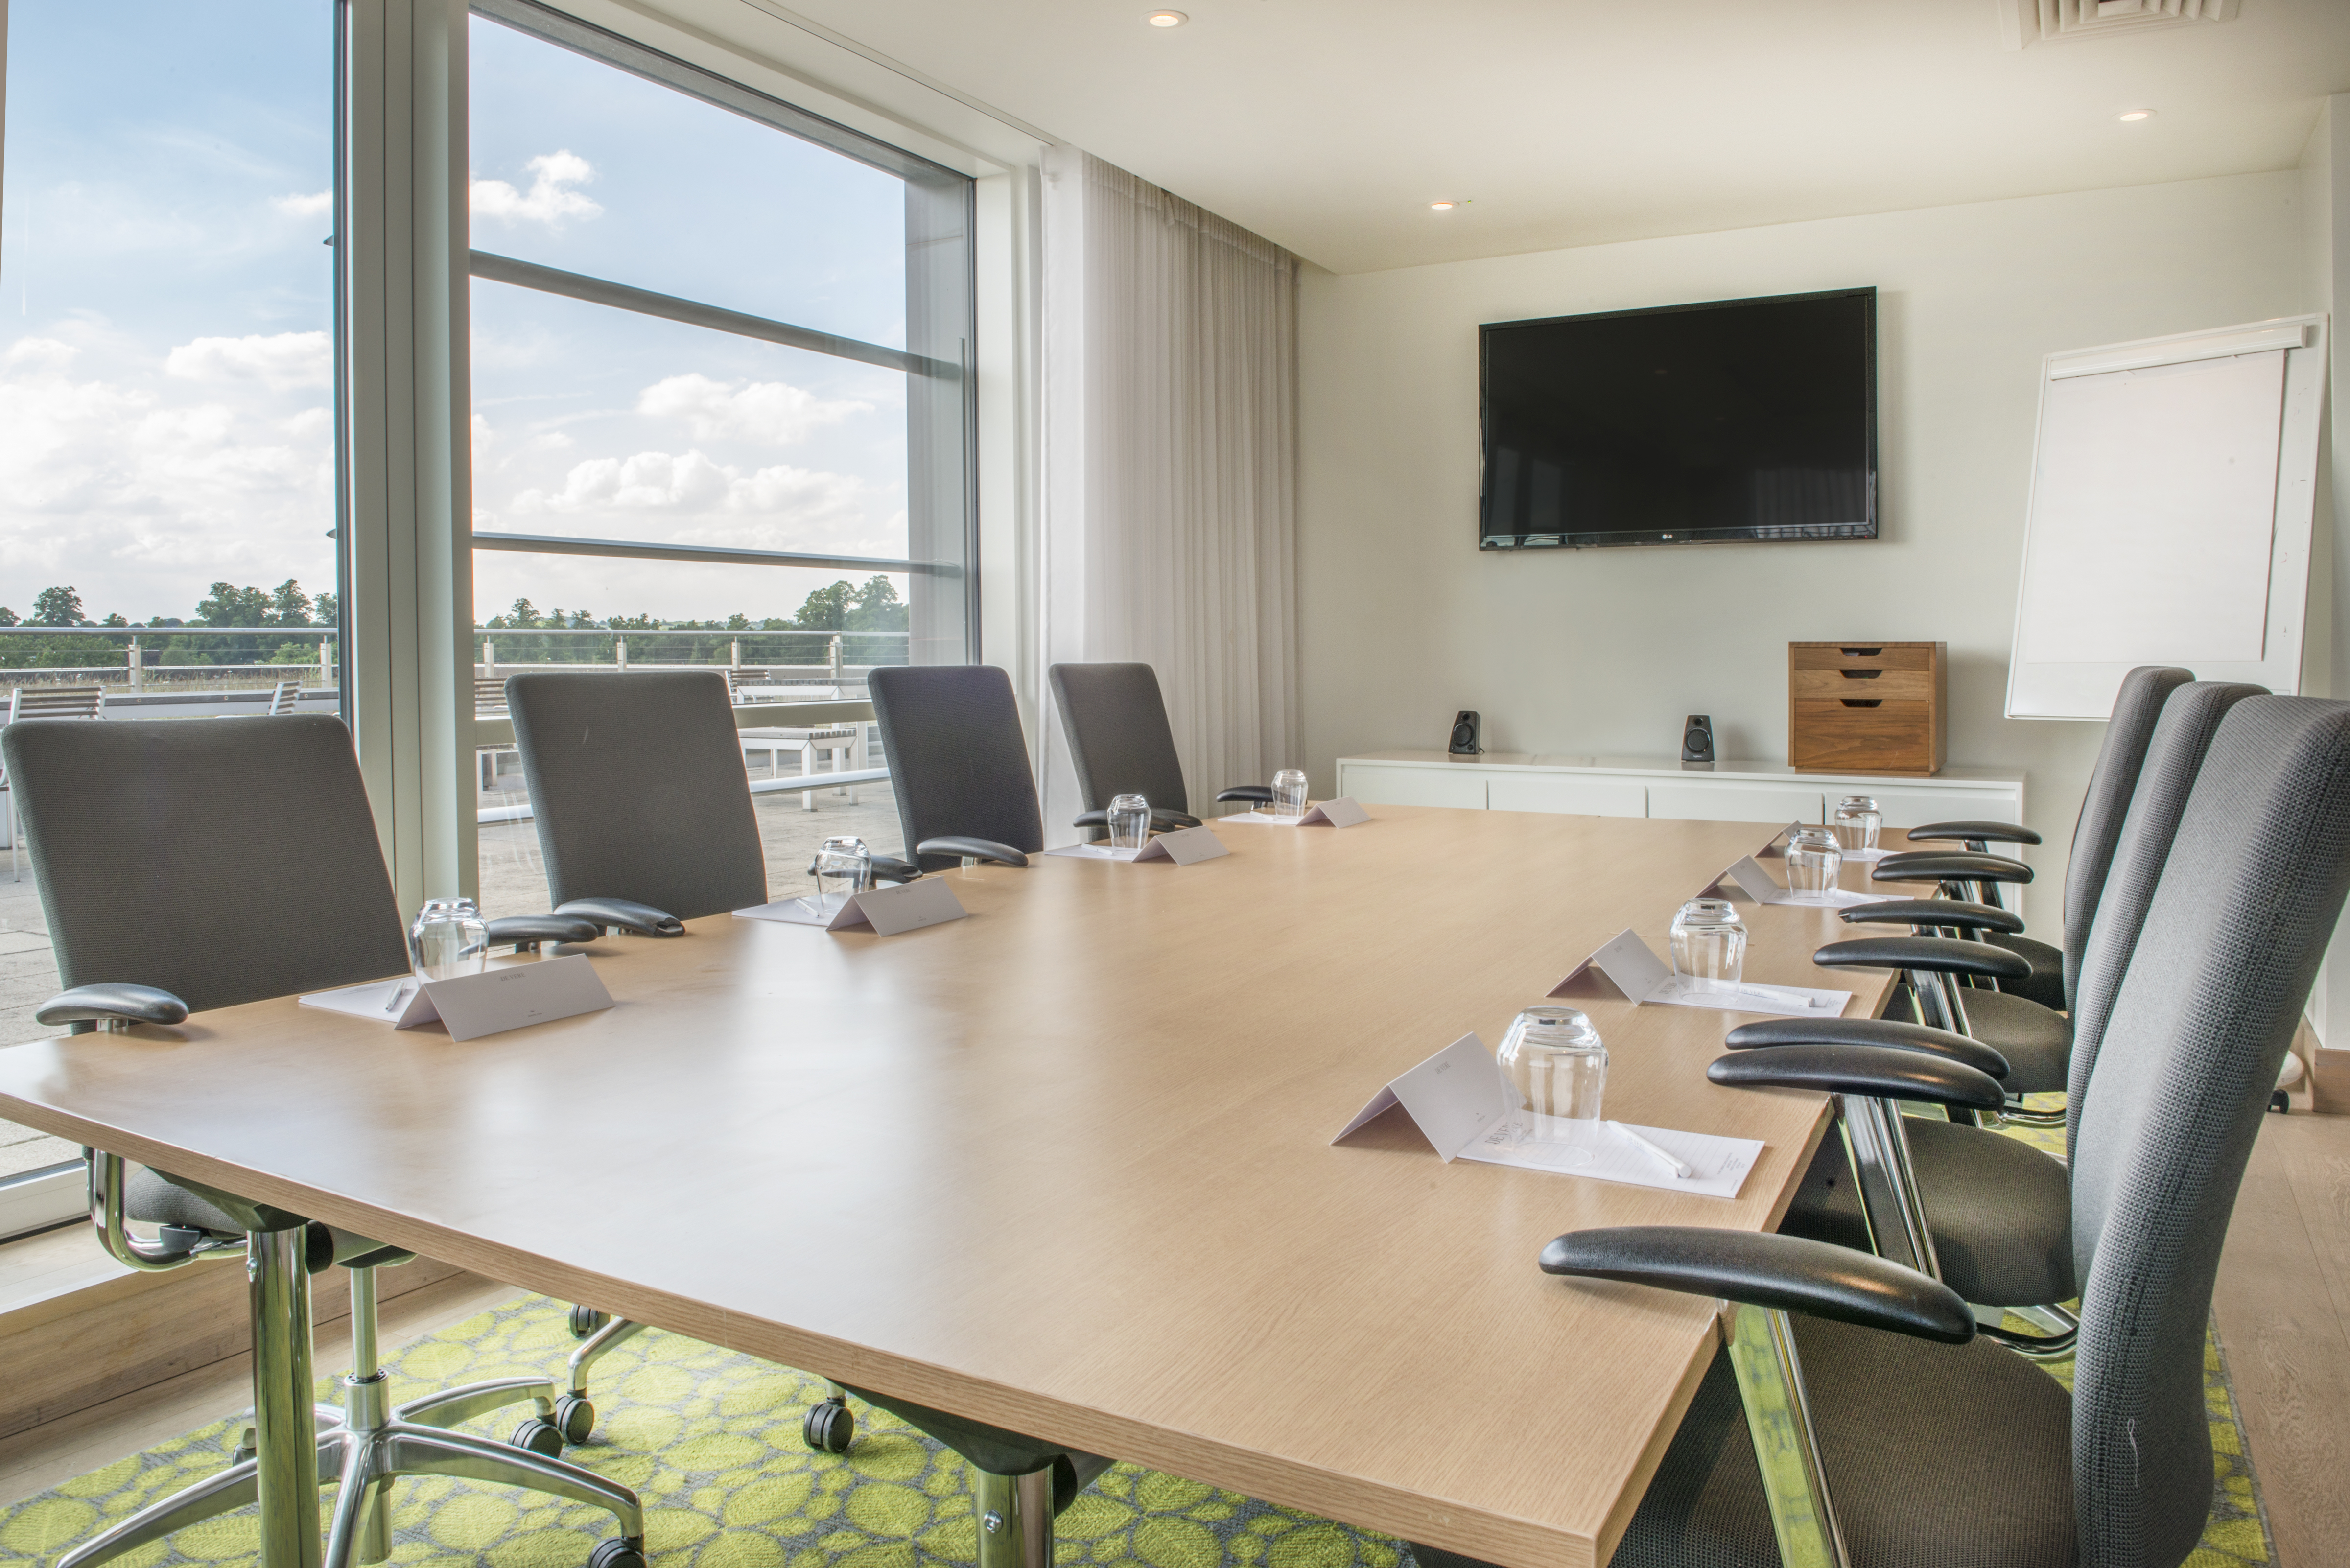 Orchard Hotel - Executive Lounge - Boardroom